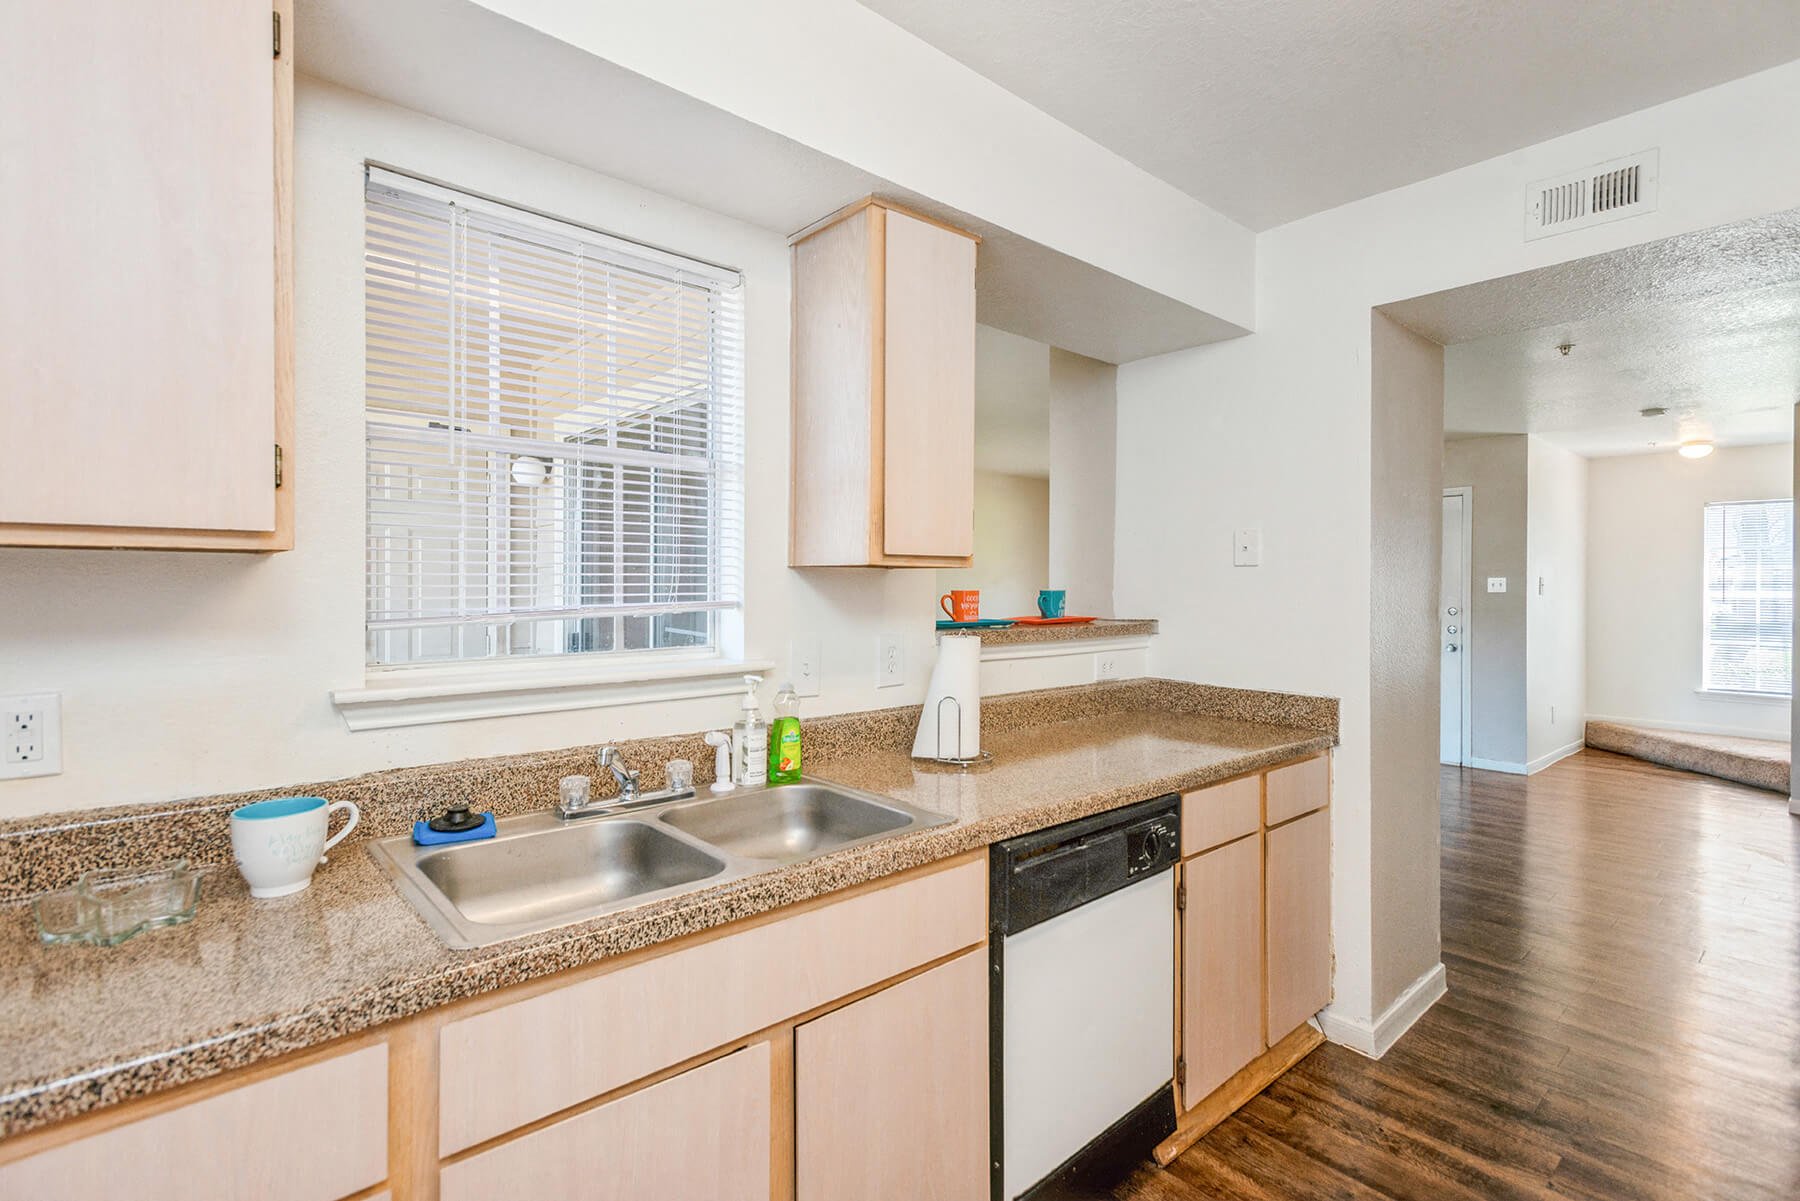 A bright kitchen with hardwood floors at the Park Village Apartments in Conroe, Texas.